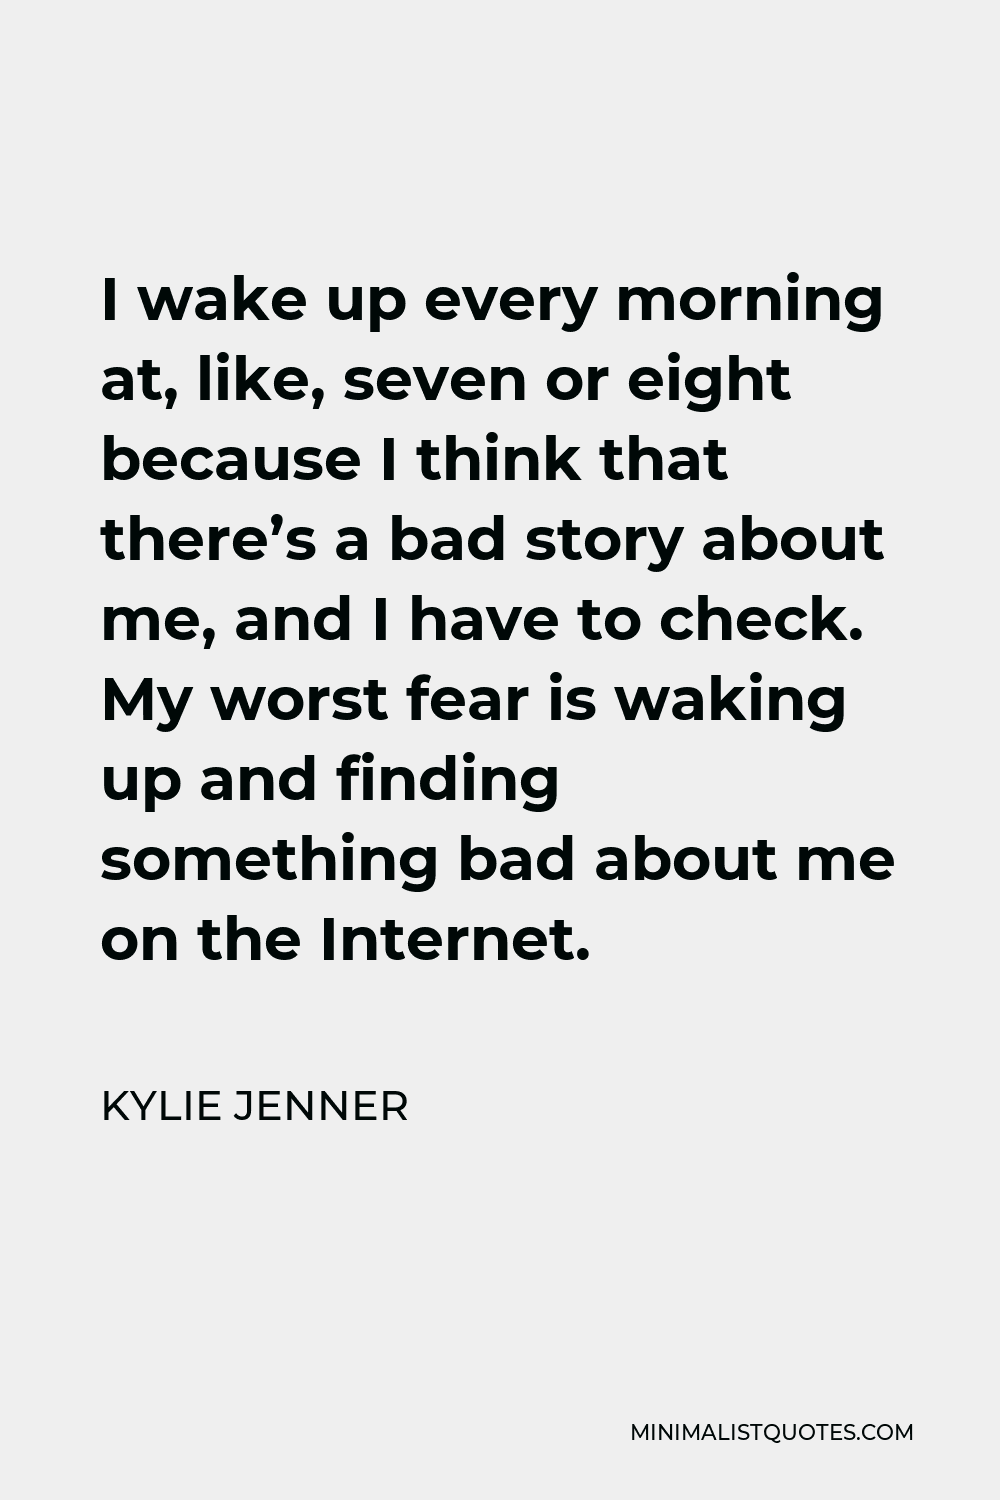 Kylie Jenner Quote - I wake up every morning at, like, seven or eight because I think that there’s a bad story about me, and I have to check. My worst fear is waking up and finding something bad about me on the Internet.